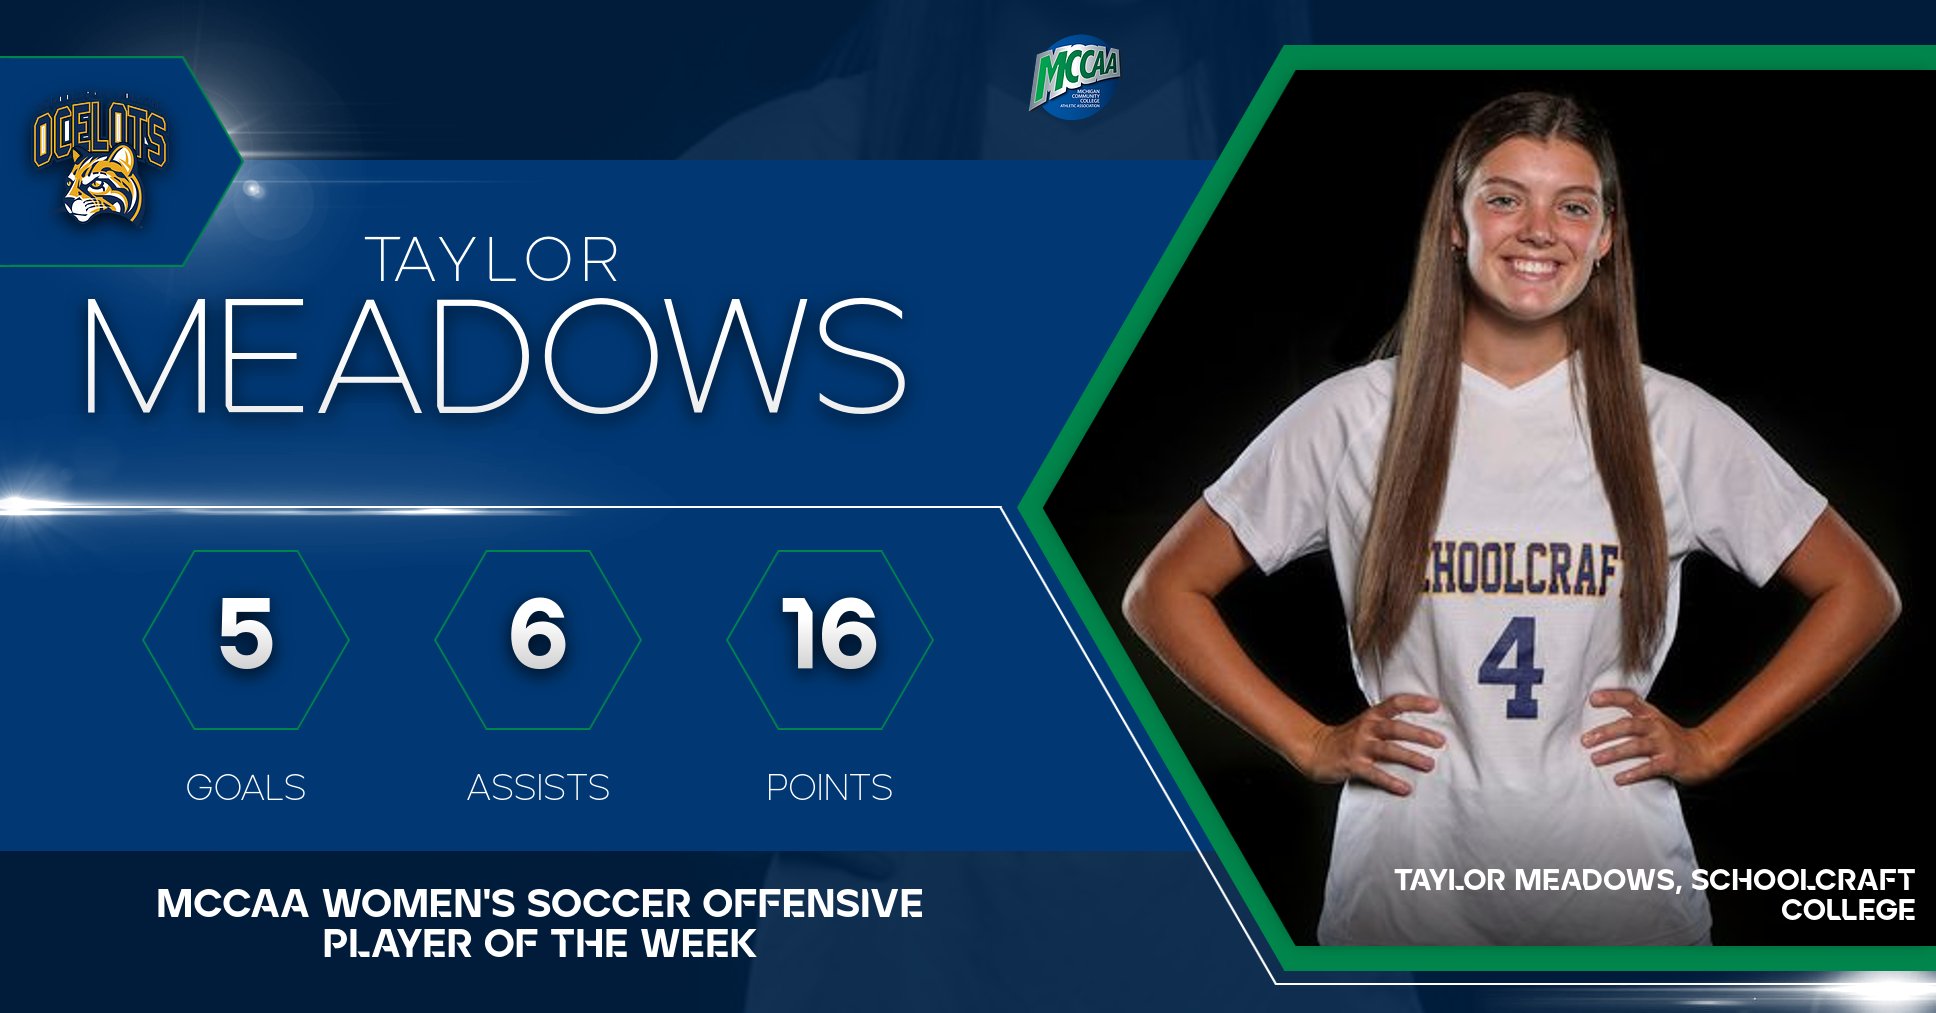 Taylor Meadows, MCCAA Women's Soccer Offensive Player of the Week, Schoolcraft College